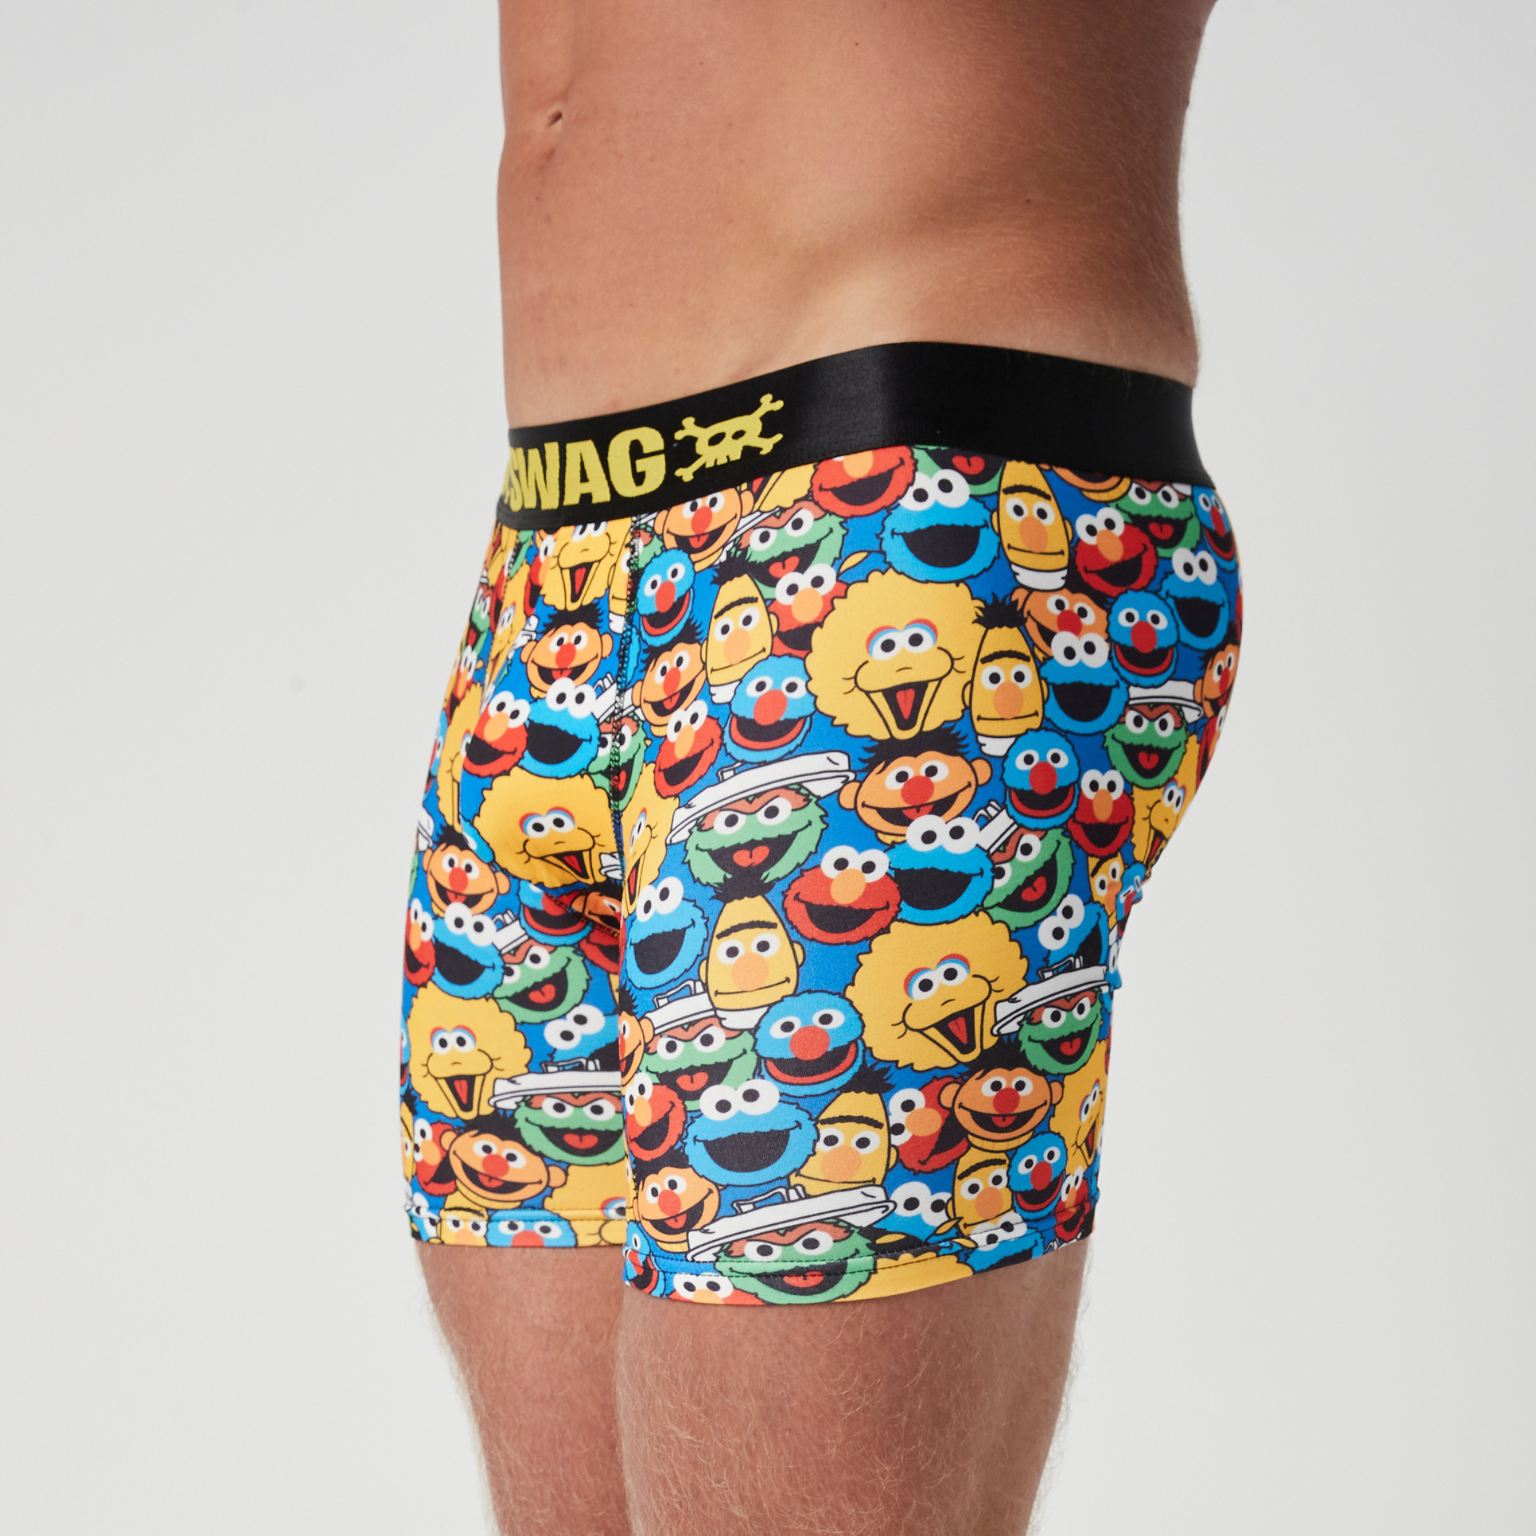 SWAG SESAME STREET BOXERS - ALL CHARACTERS